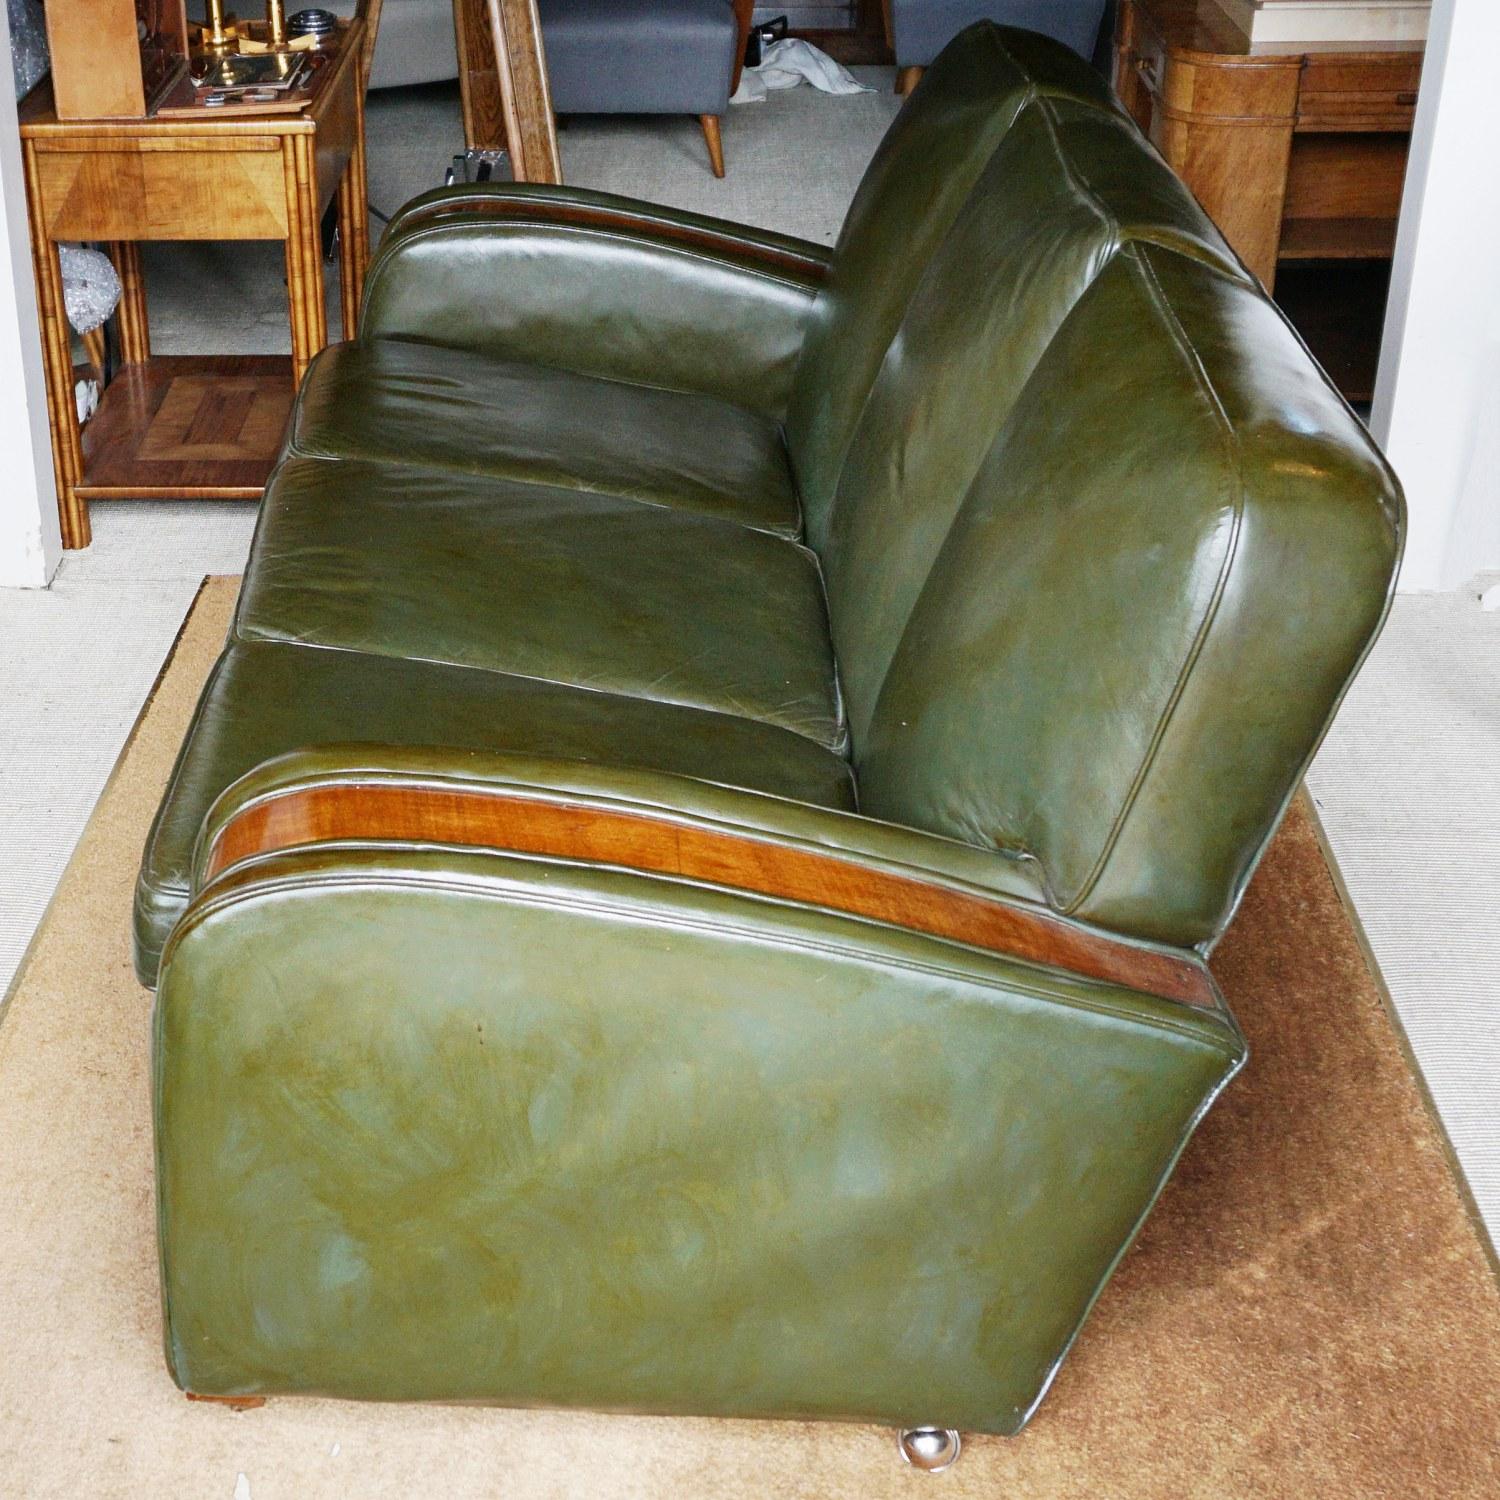 Art Deco Tank Sofa Attributed to Heal's of London 1